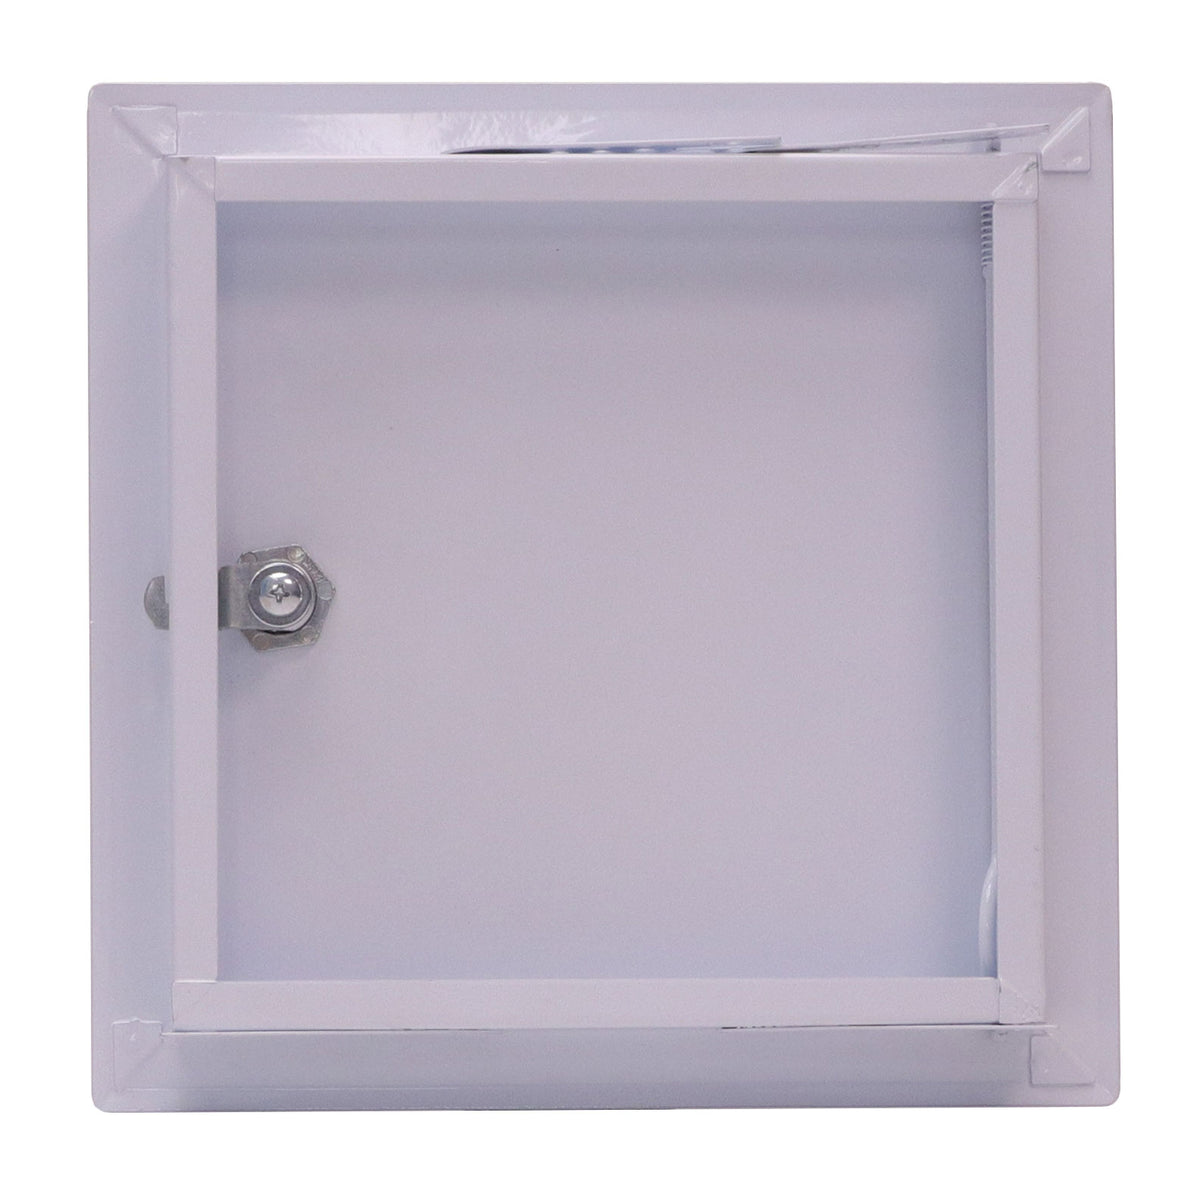 20&quot; X 20&quot; Steel Access Panel Removable Door For Wall / Ceiling Application (Lock and Key) With Frame - [Outer Dimensions: 21&quot; Width X 21&quot; Height]